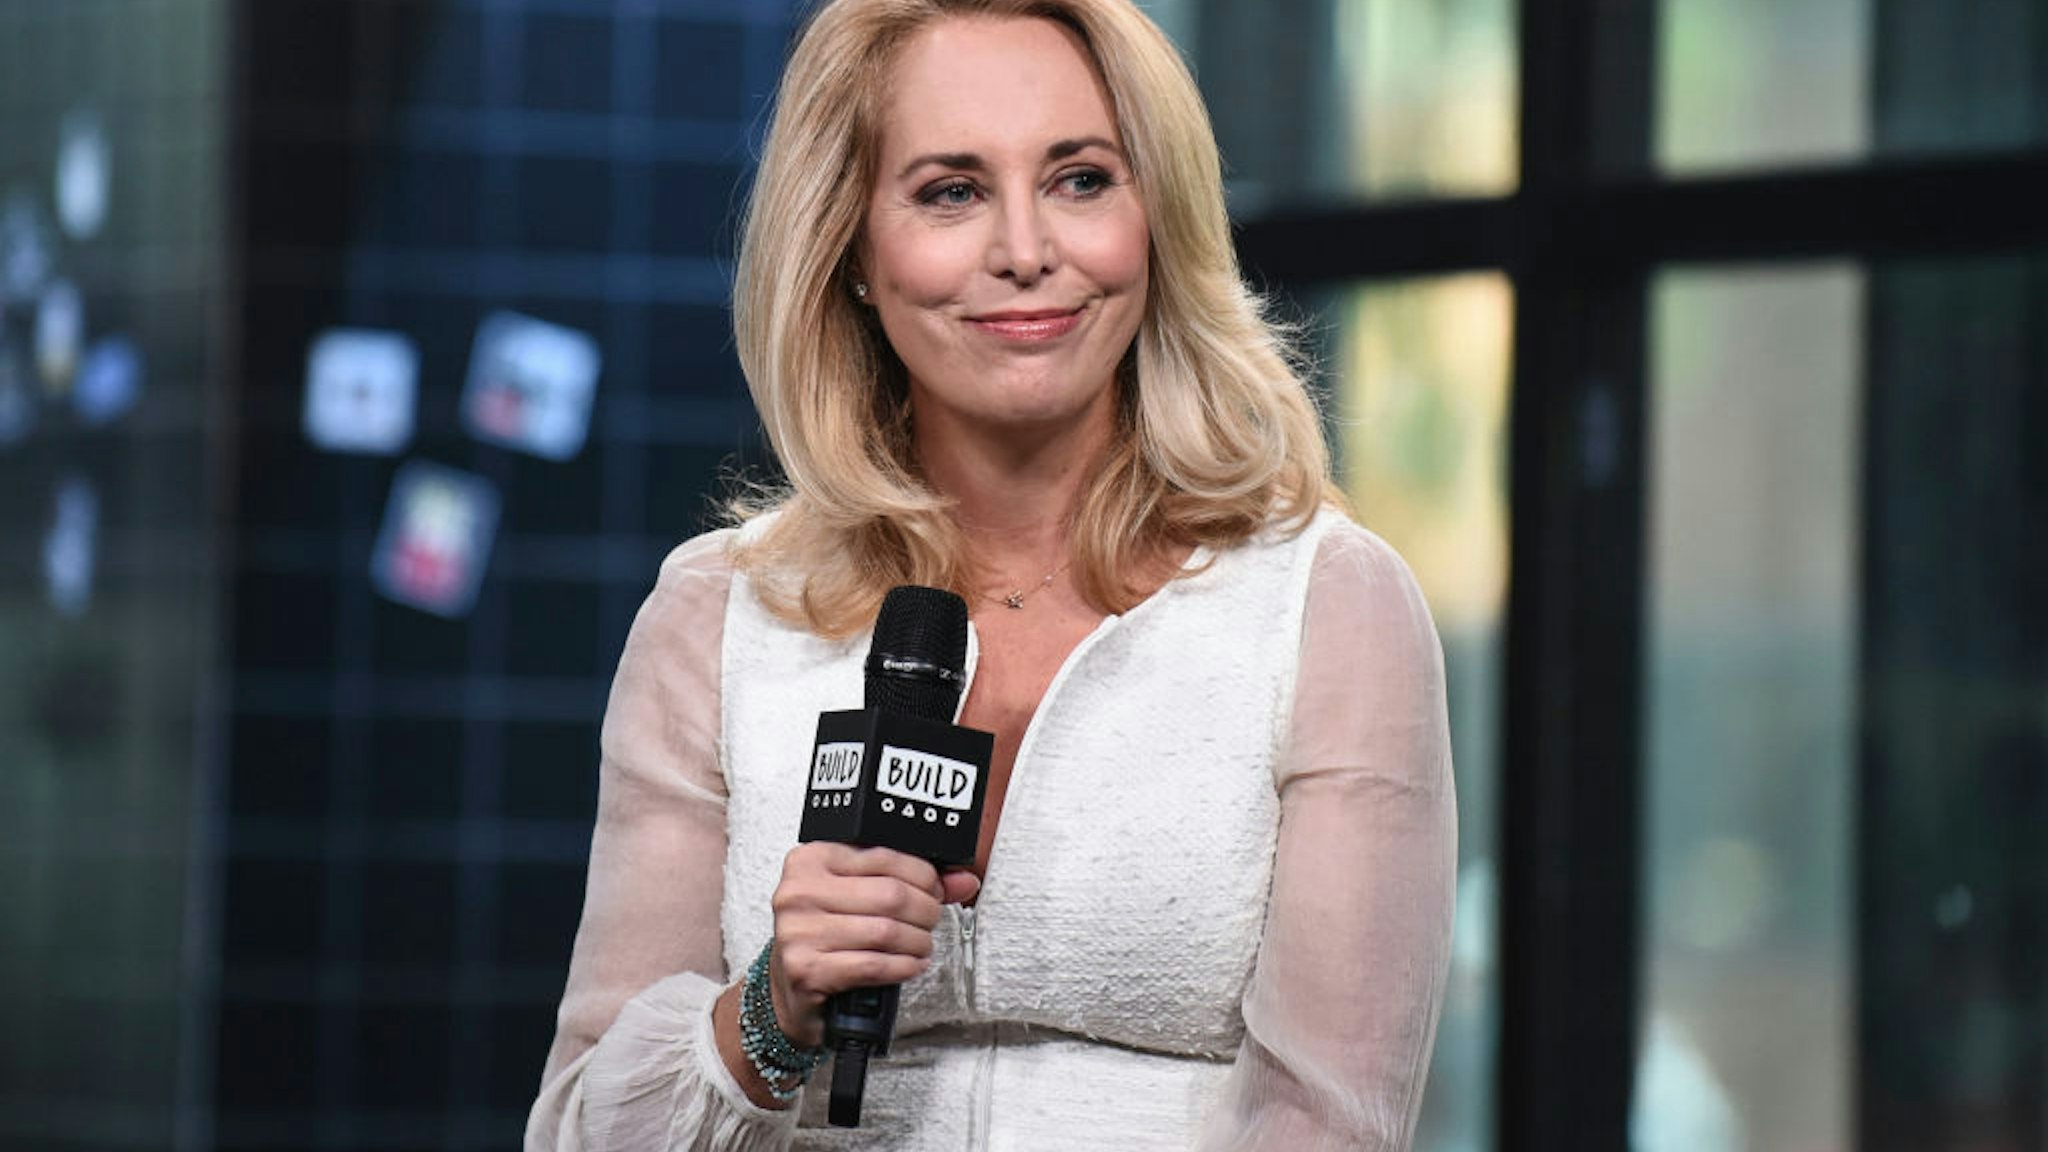 Valerie Plame attends the Build Series to discuss the film 'Fair Game' at Build Studio on October 24, 2018 in New York City.